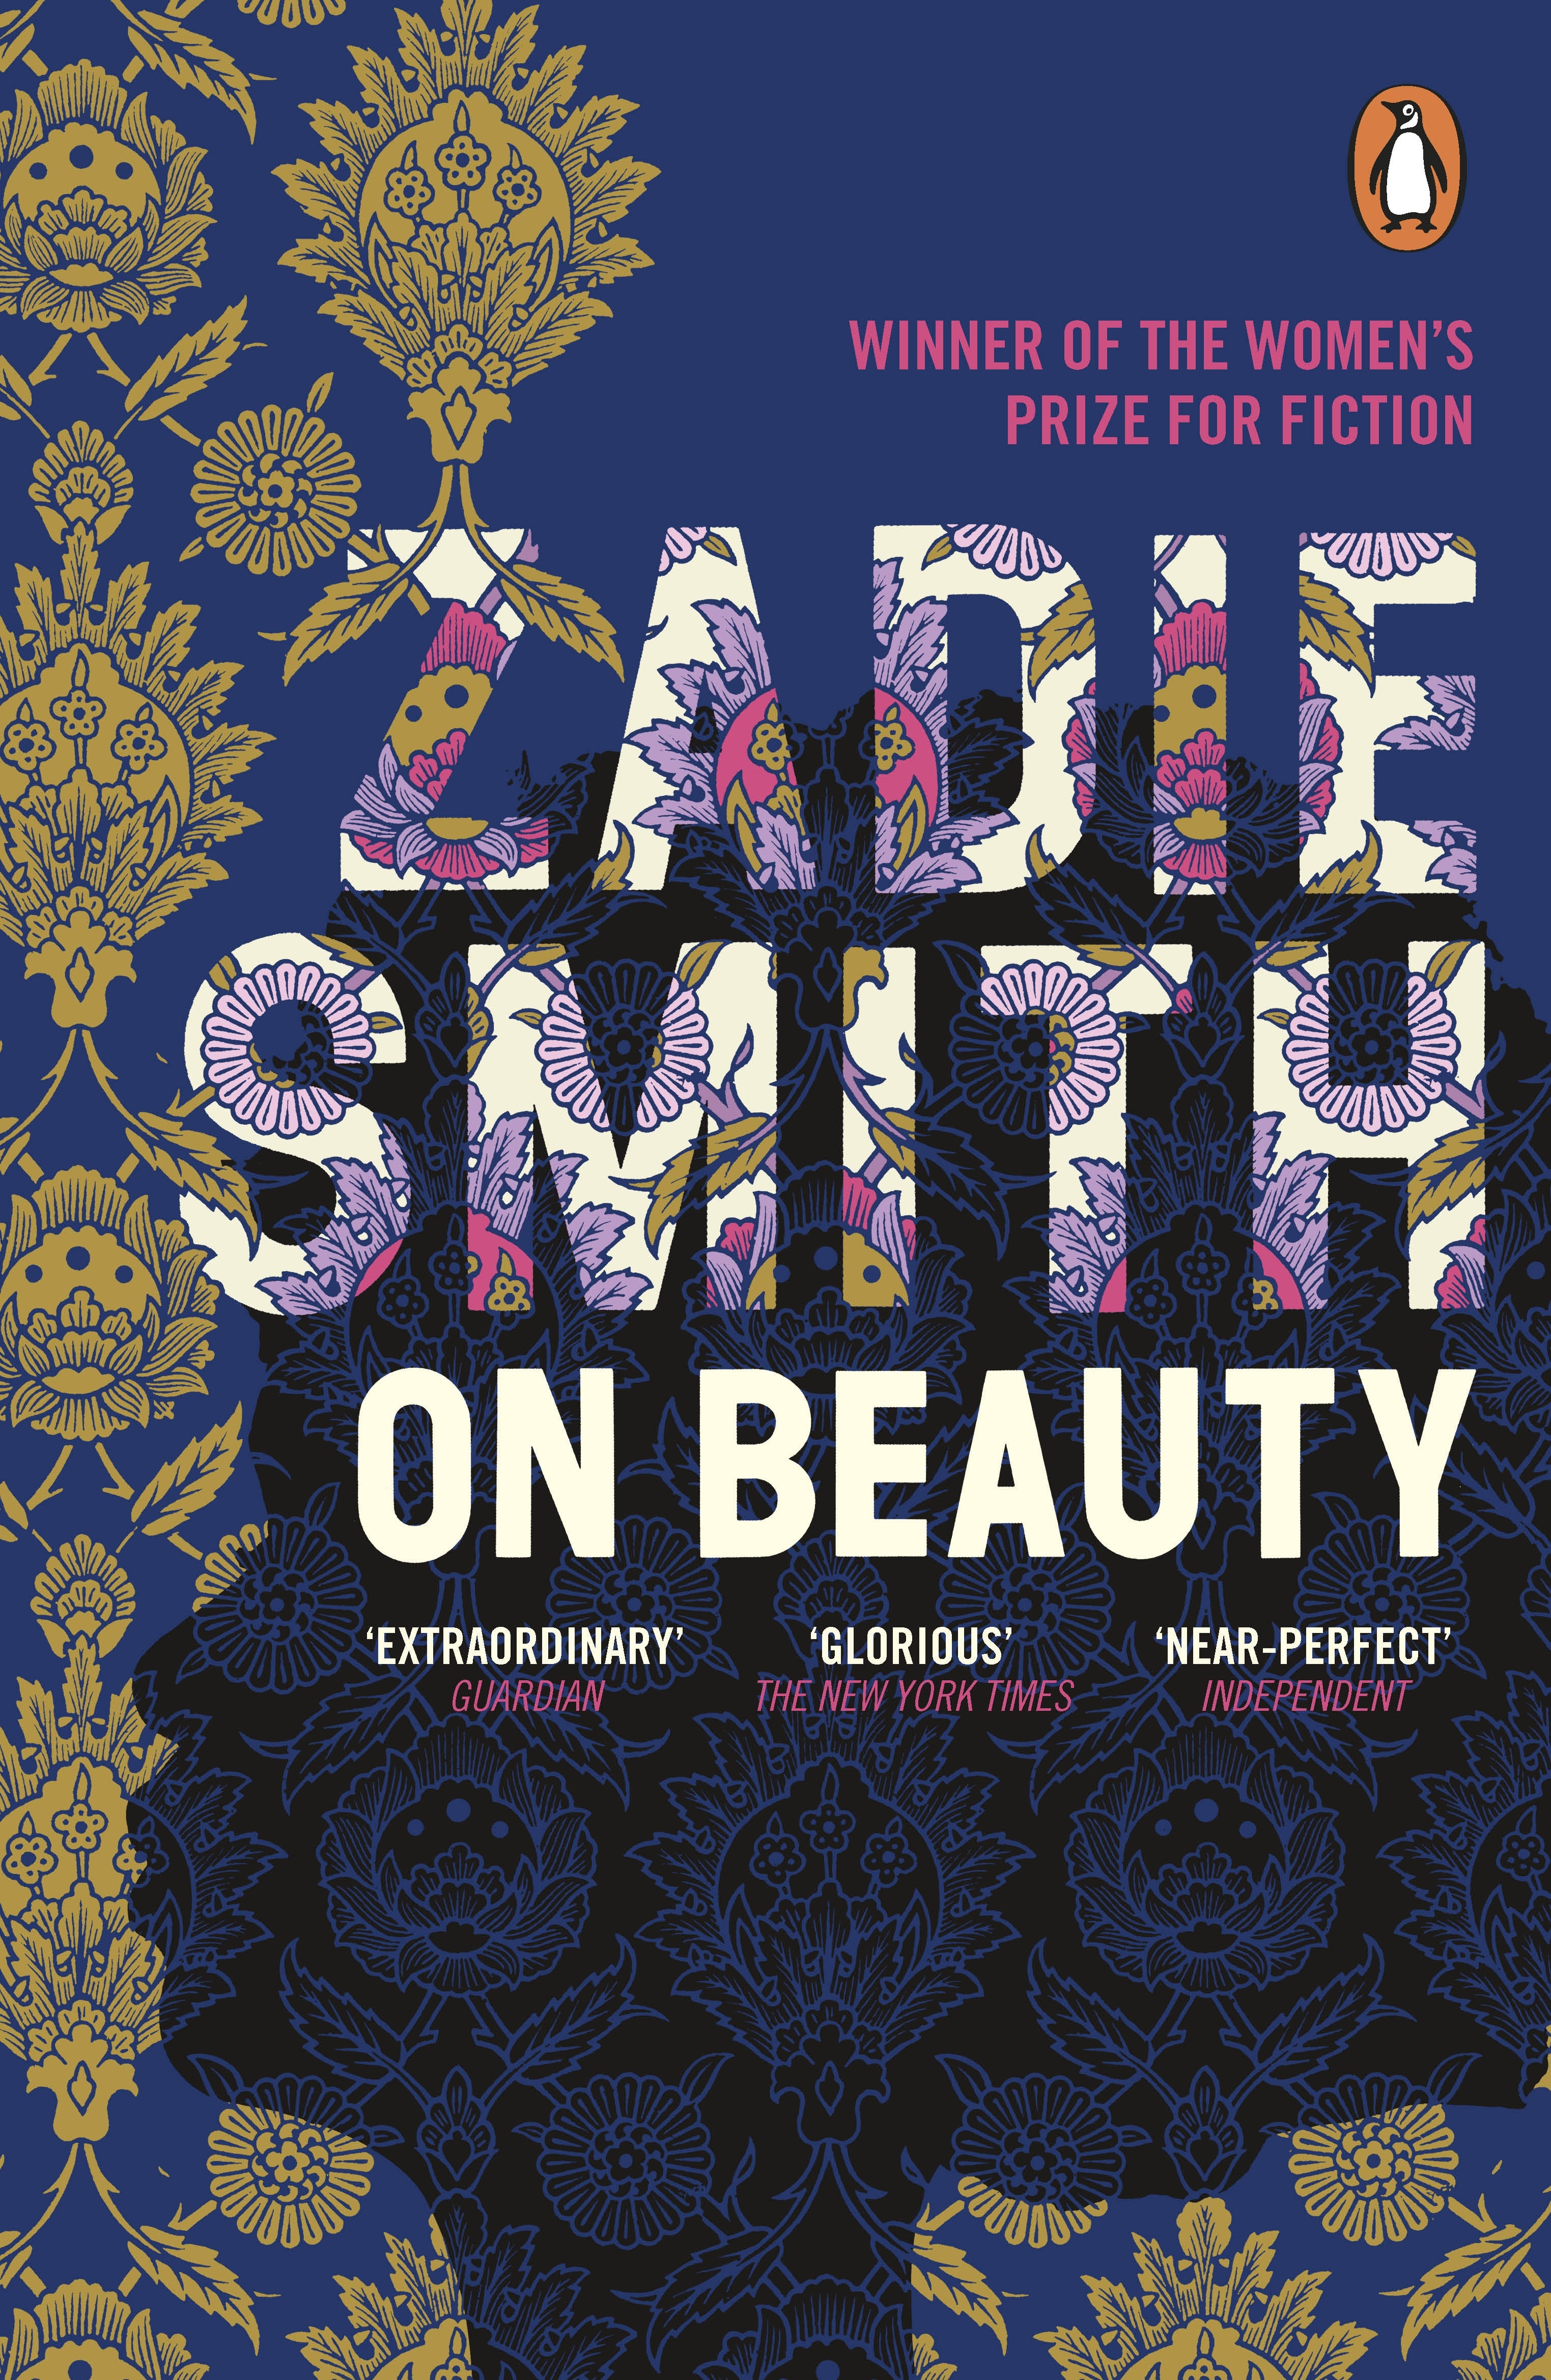 Book “On Beauty” by Zadie Smith — July 6, 2006